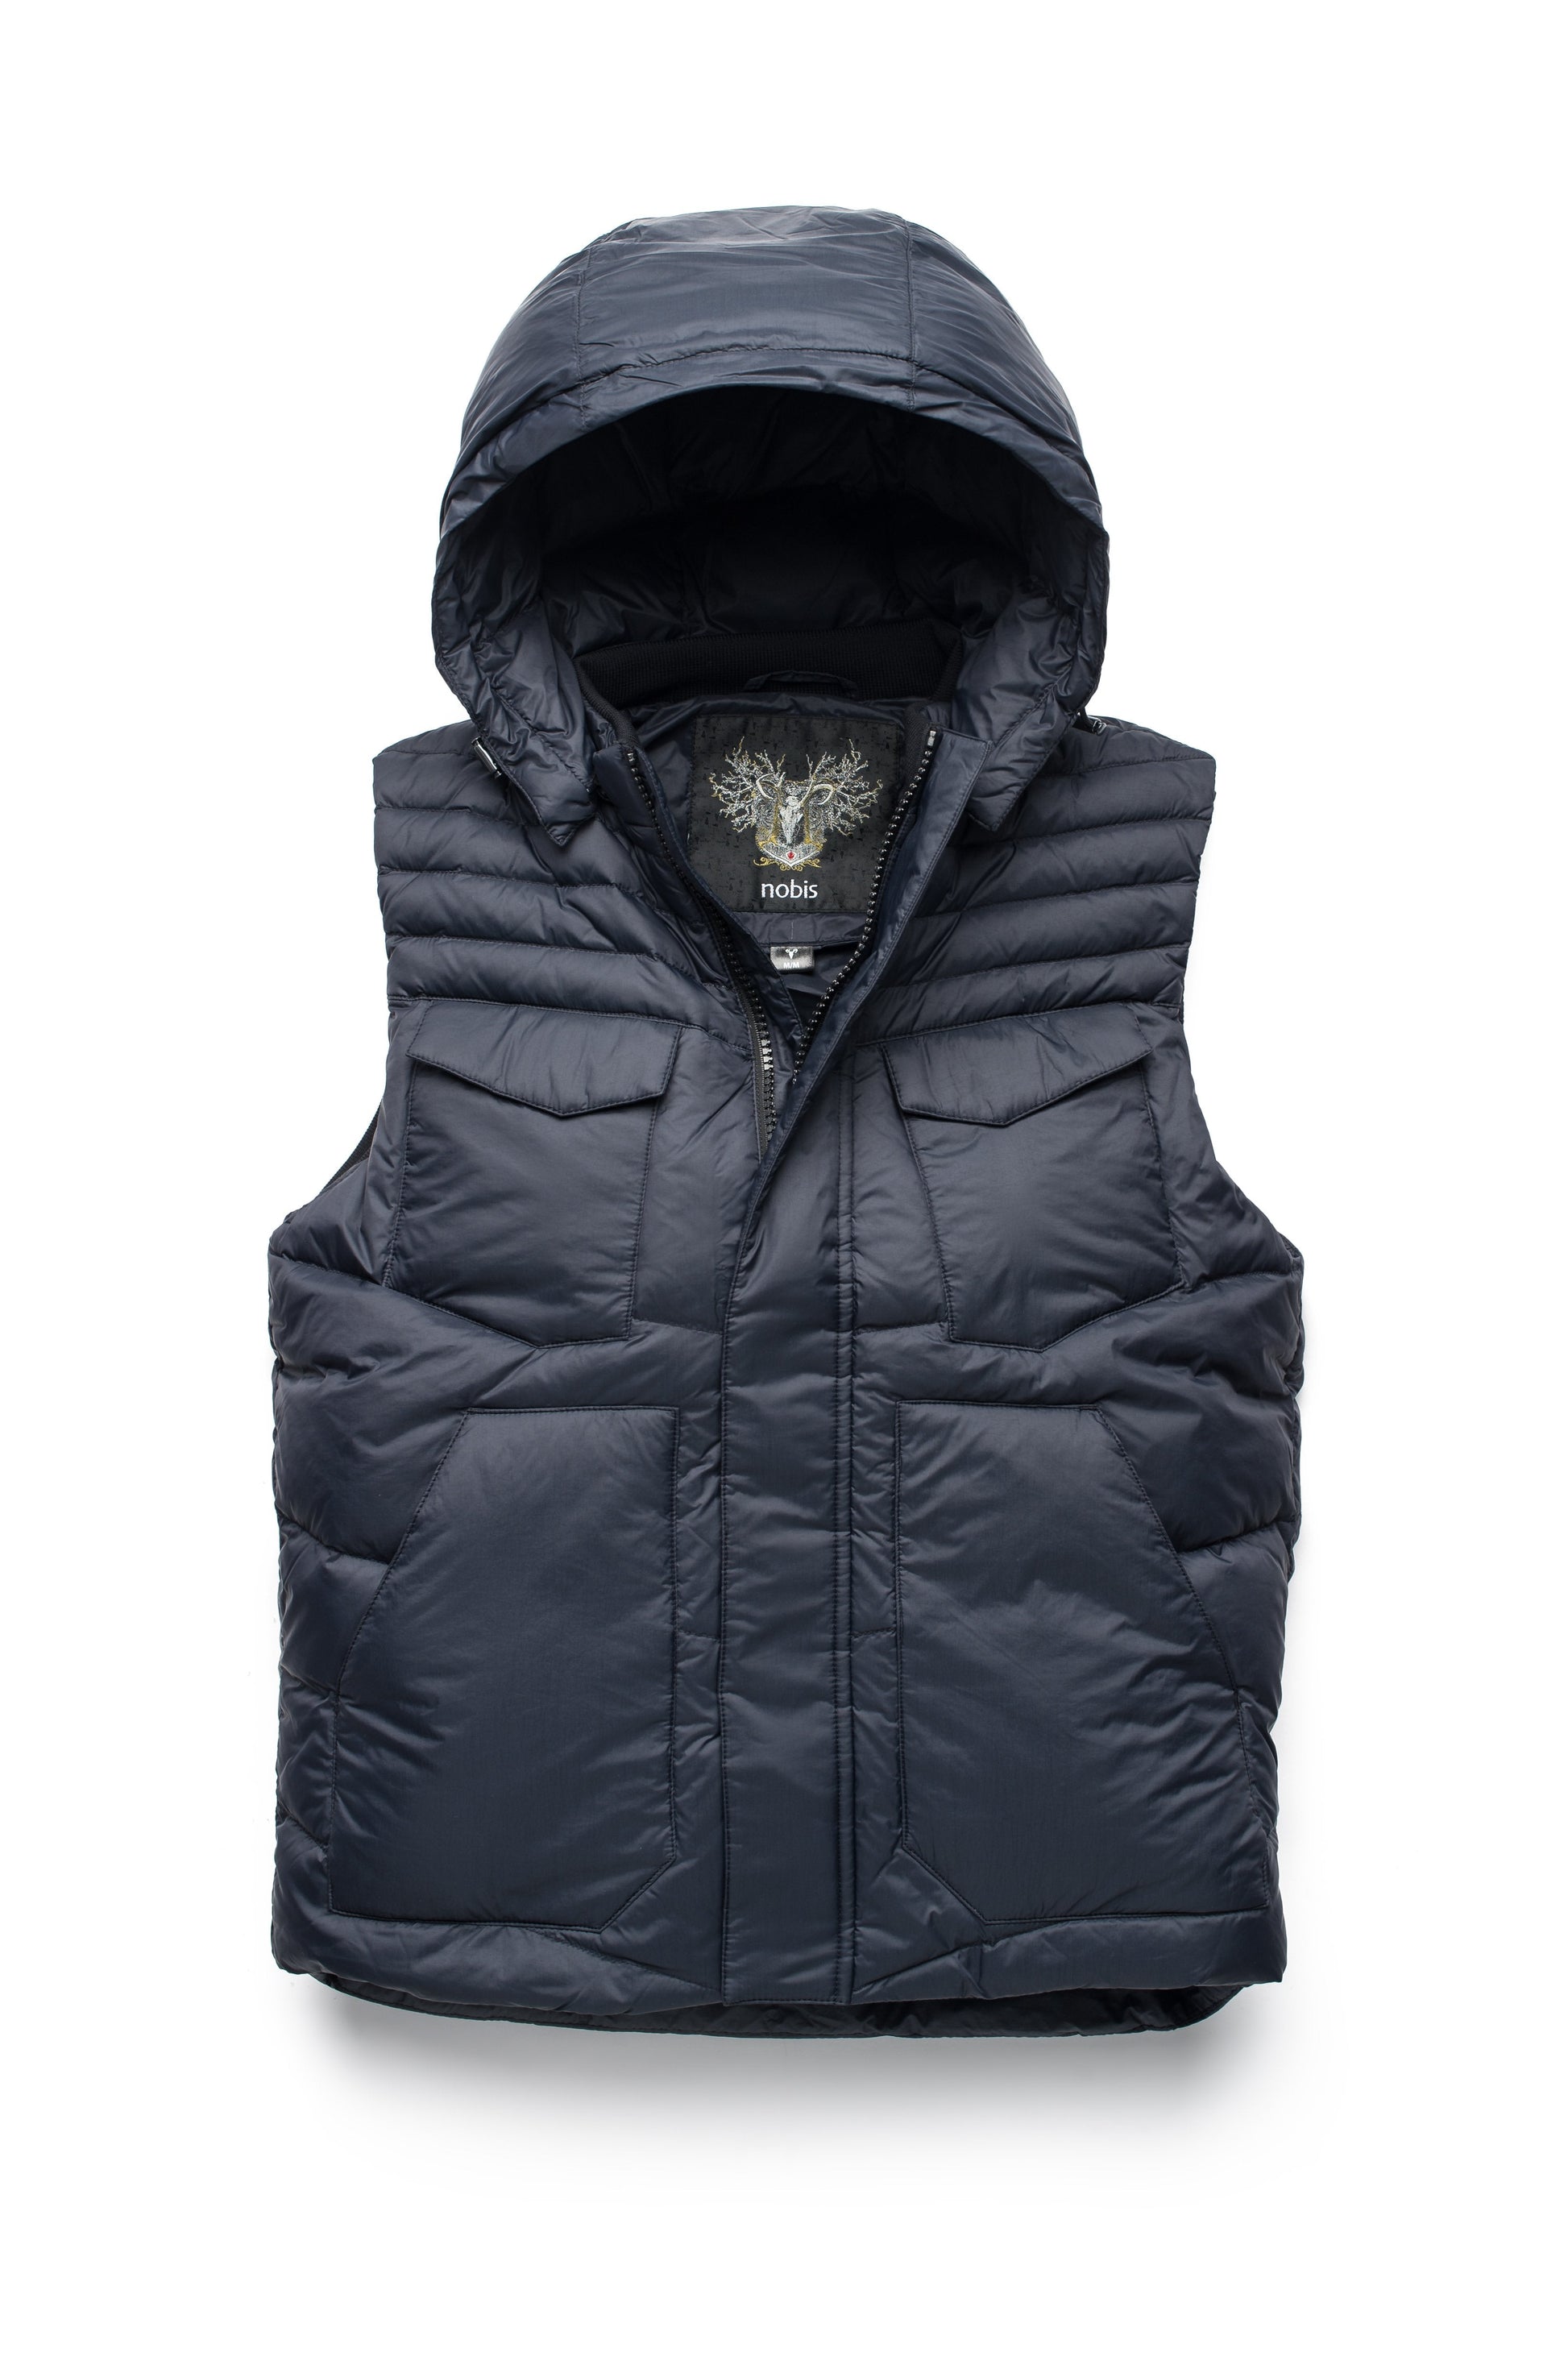 Men's lightweight vest with accents like our removable hood and chevron quilting in Navy